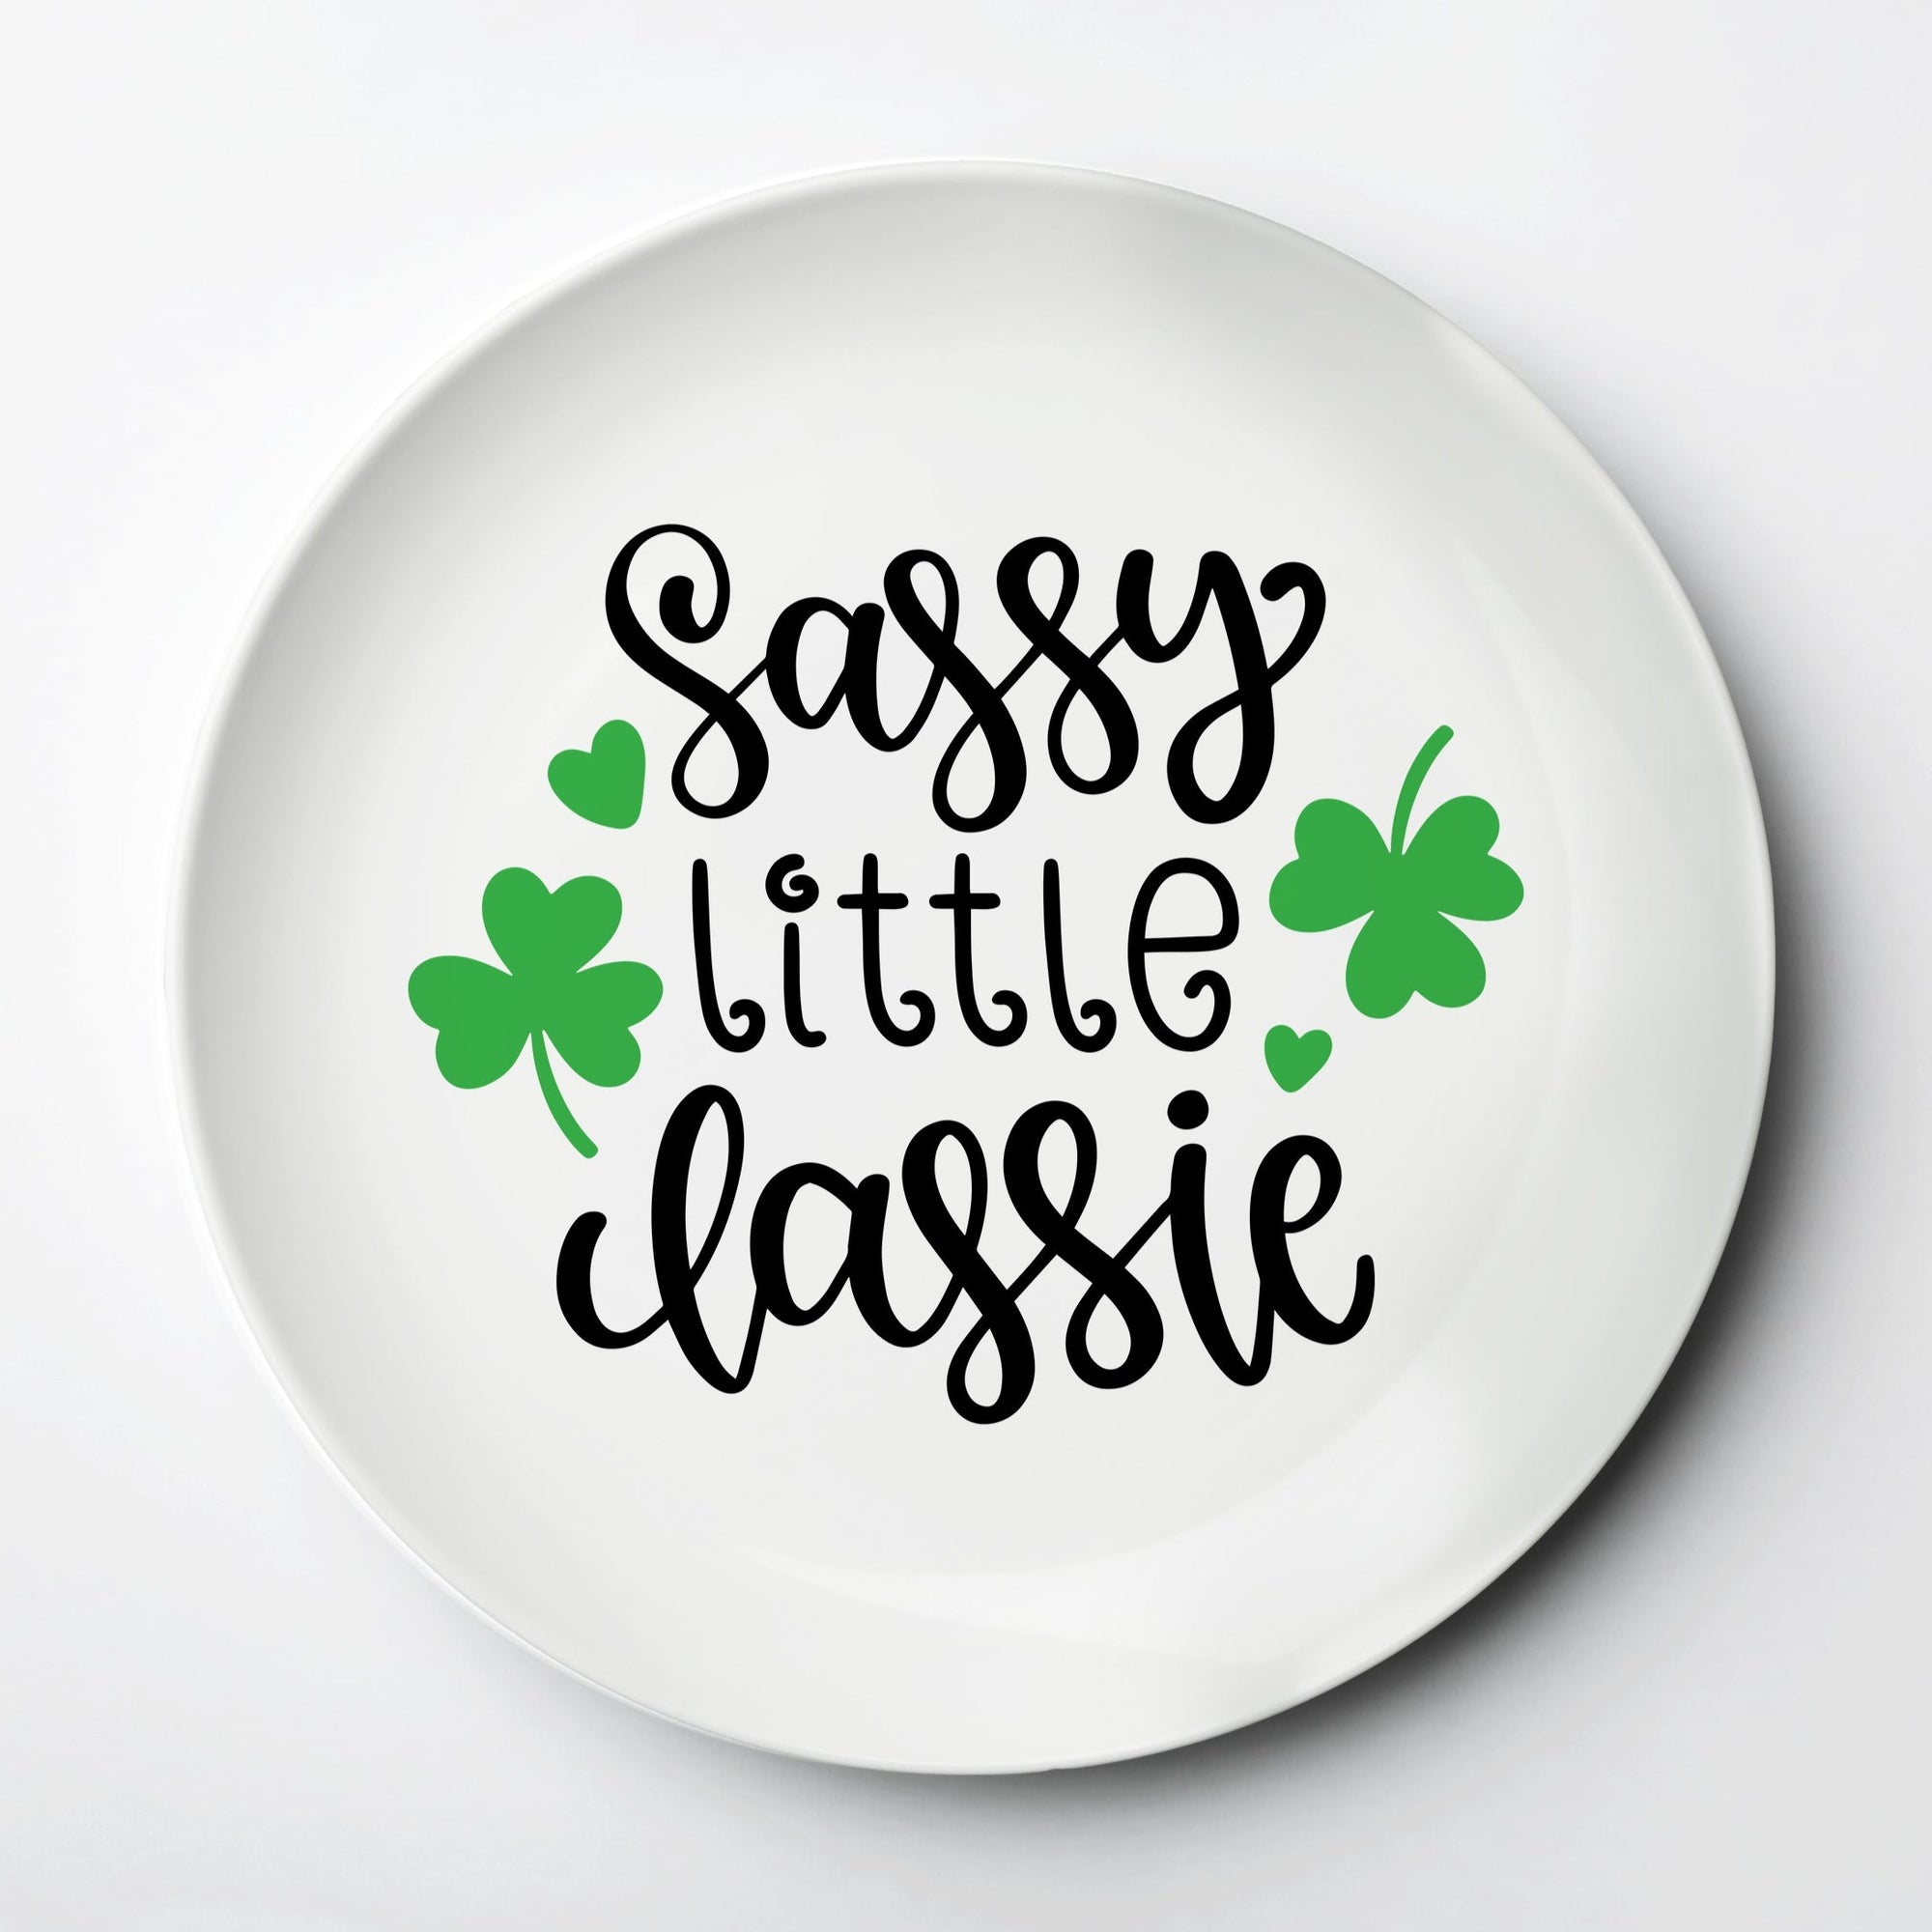 St. Patrick's Day, Sassie little Lassie ThermoSāf® kids reusable plate, microwave, dishwasher and oven safe.  Made in the USA, Pipsy.com